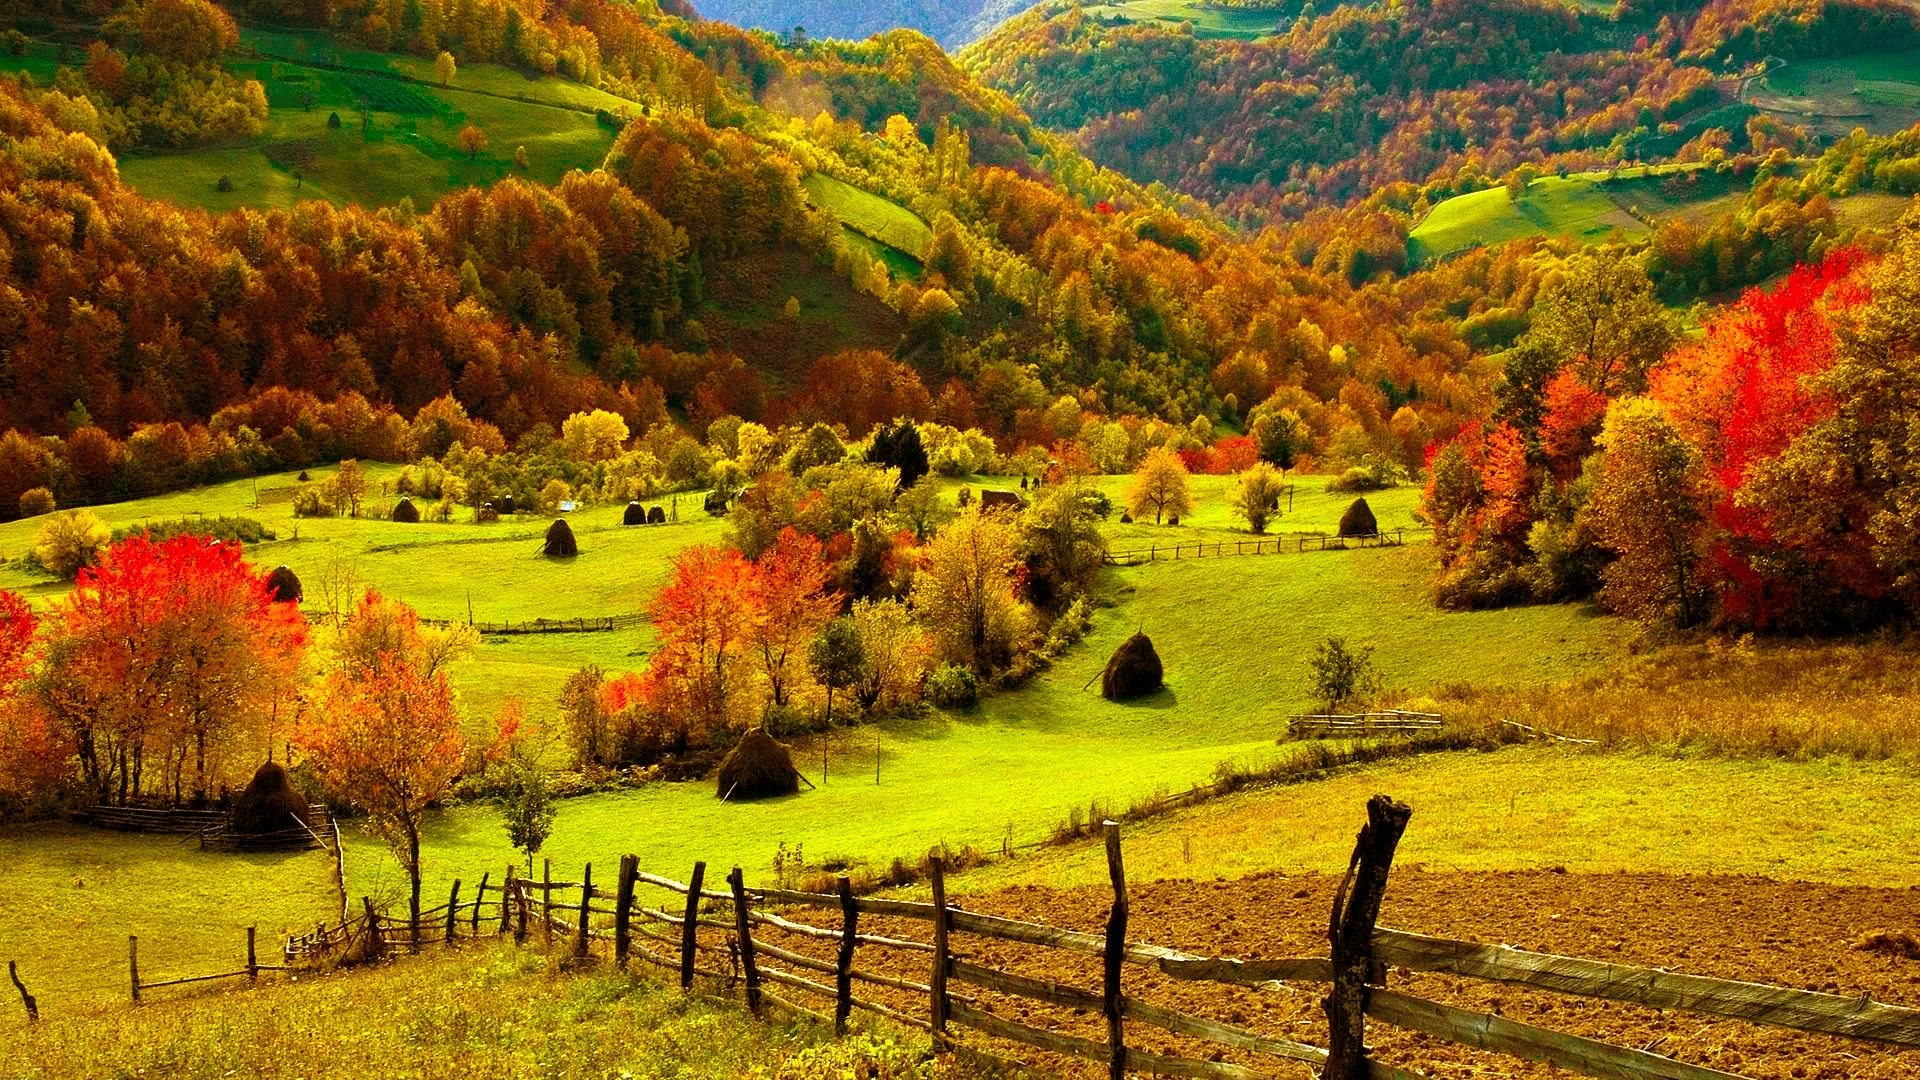  fall seasons leaves color scenic view bright wallpaper background